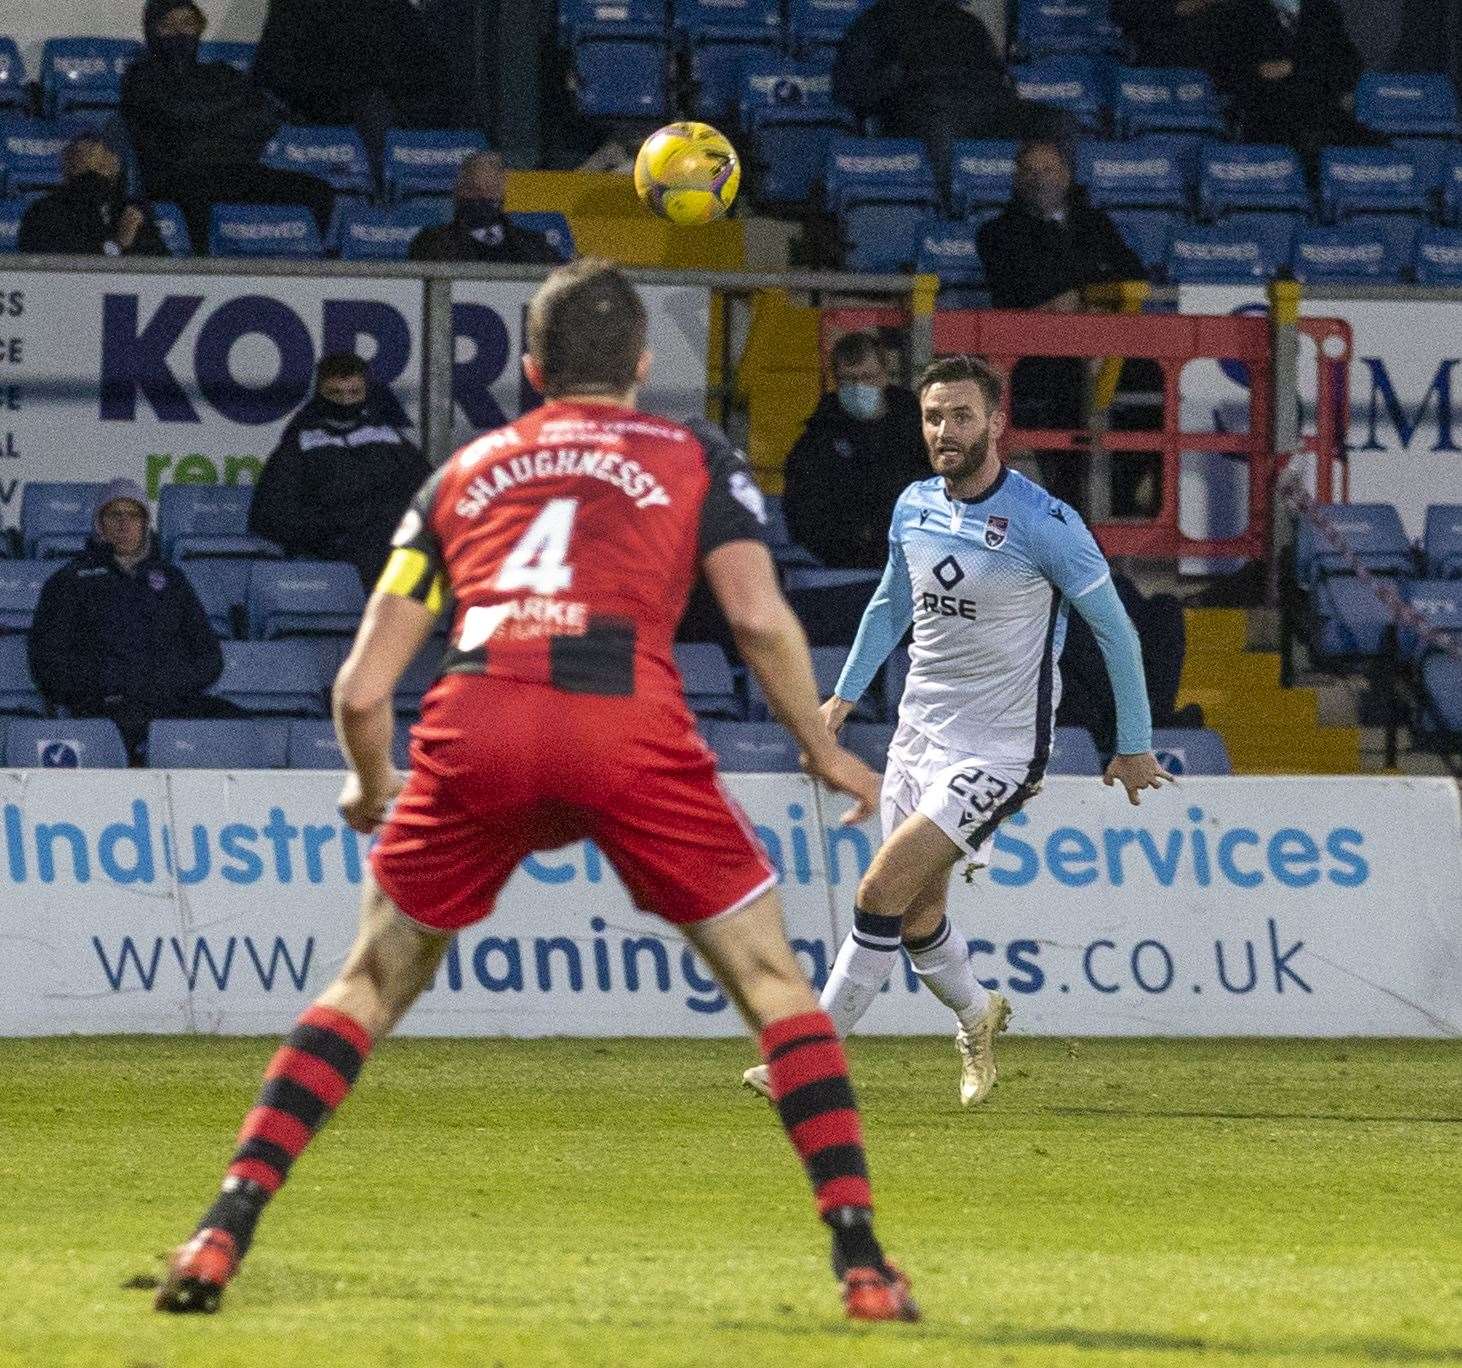 Picture - Ken Macpherson, Inverness. Ross County(1) v St.Mirren(3). 21.04.21. Ross County's Jason Naismith sends a cross into the penalty box.